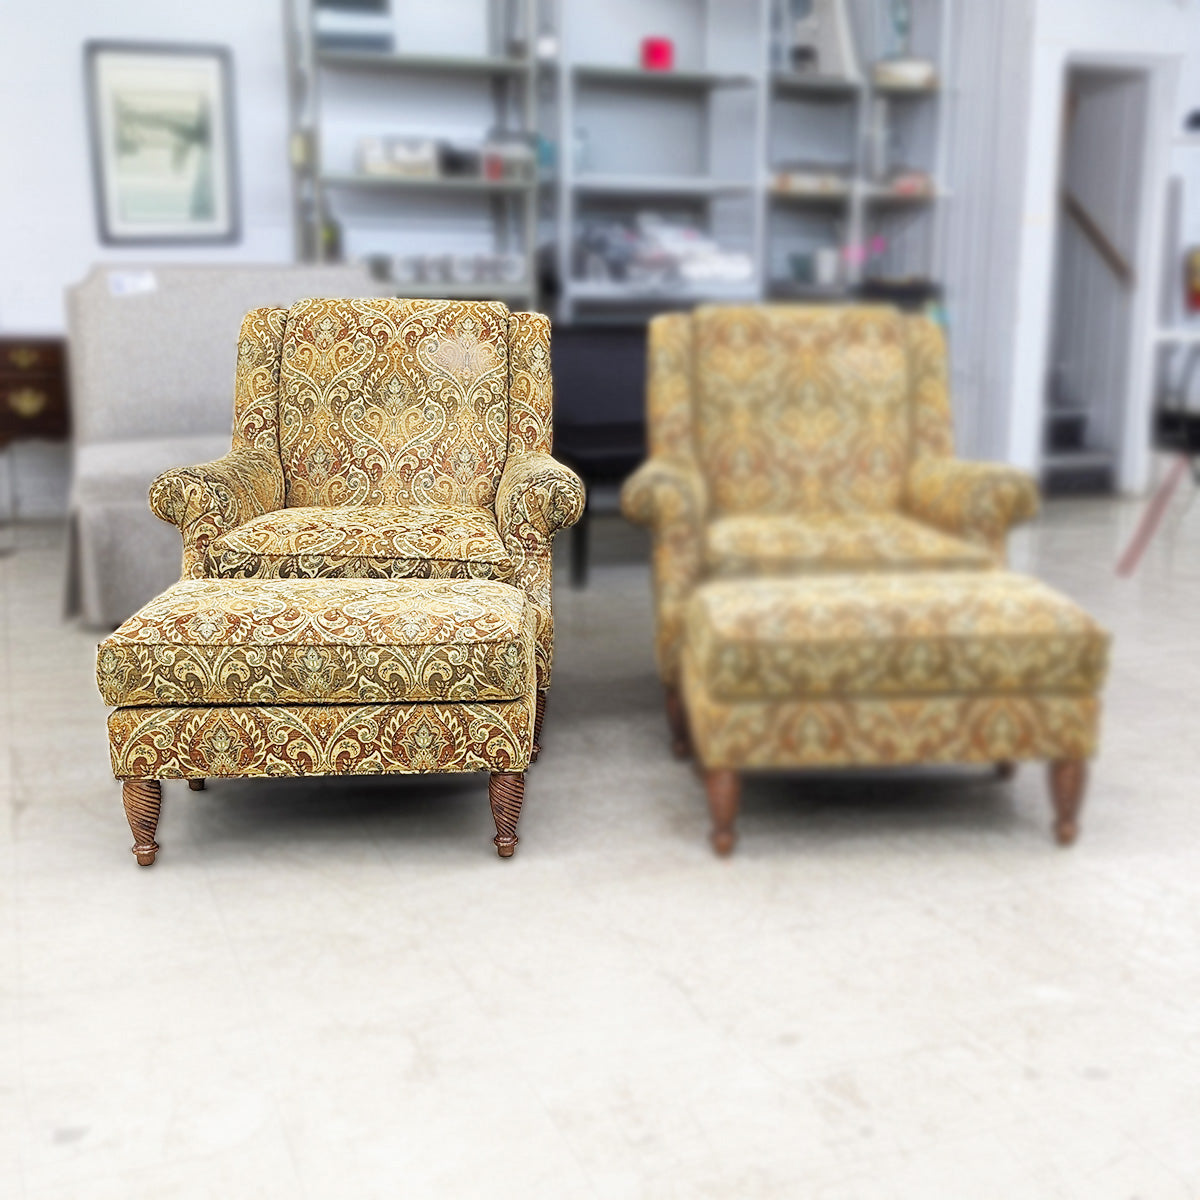 PAIR Sherrill Paisley Armchairs + Ottomans (Sold Separately) - Habroc - Online ReStore